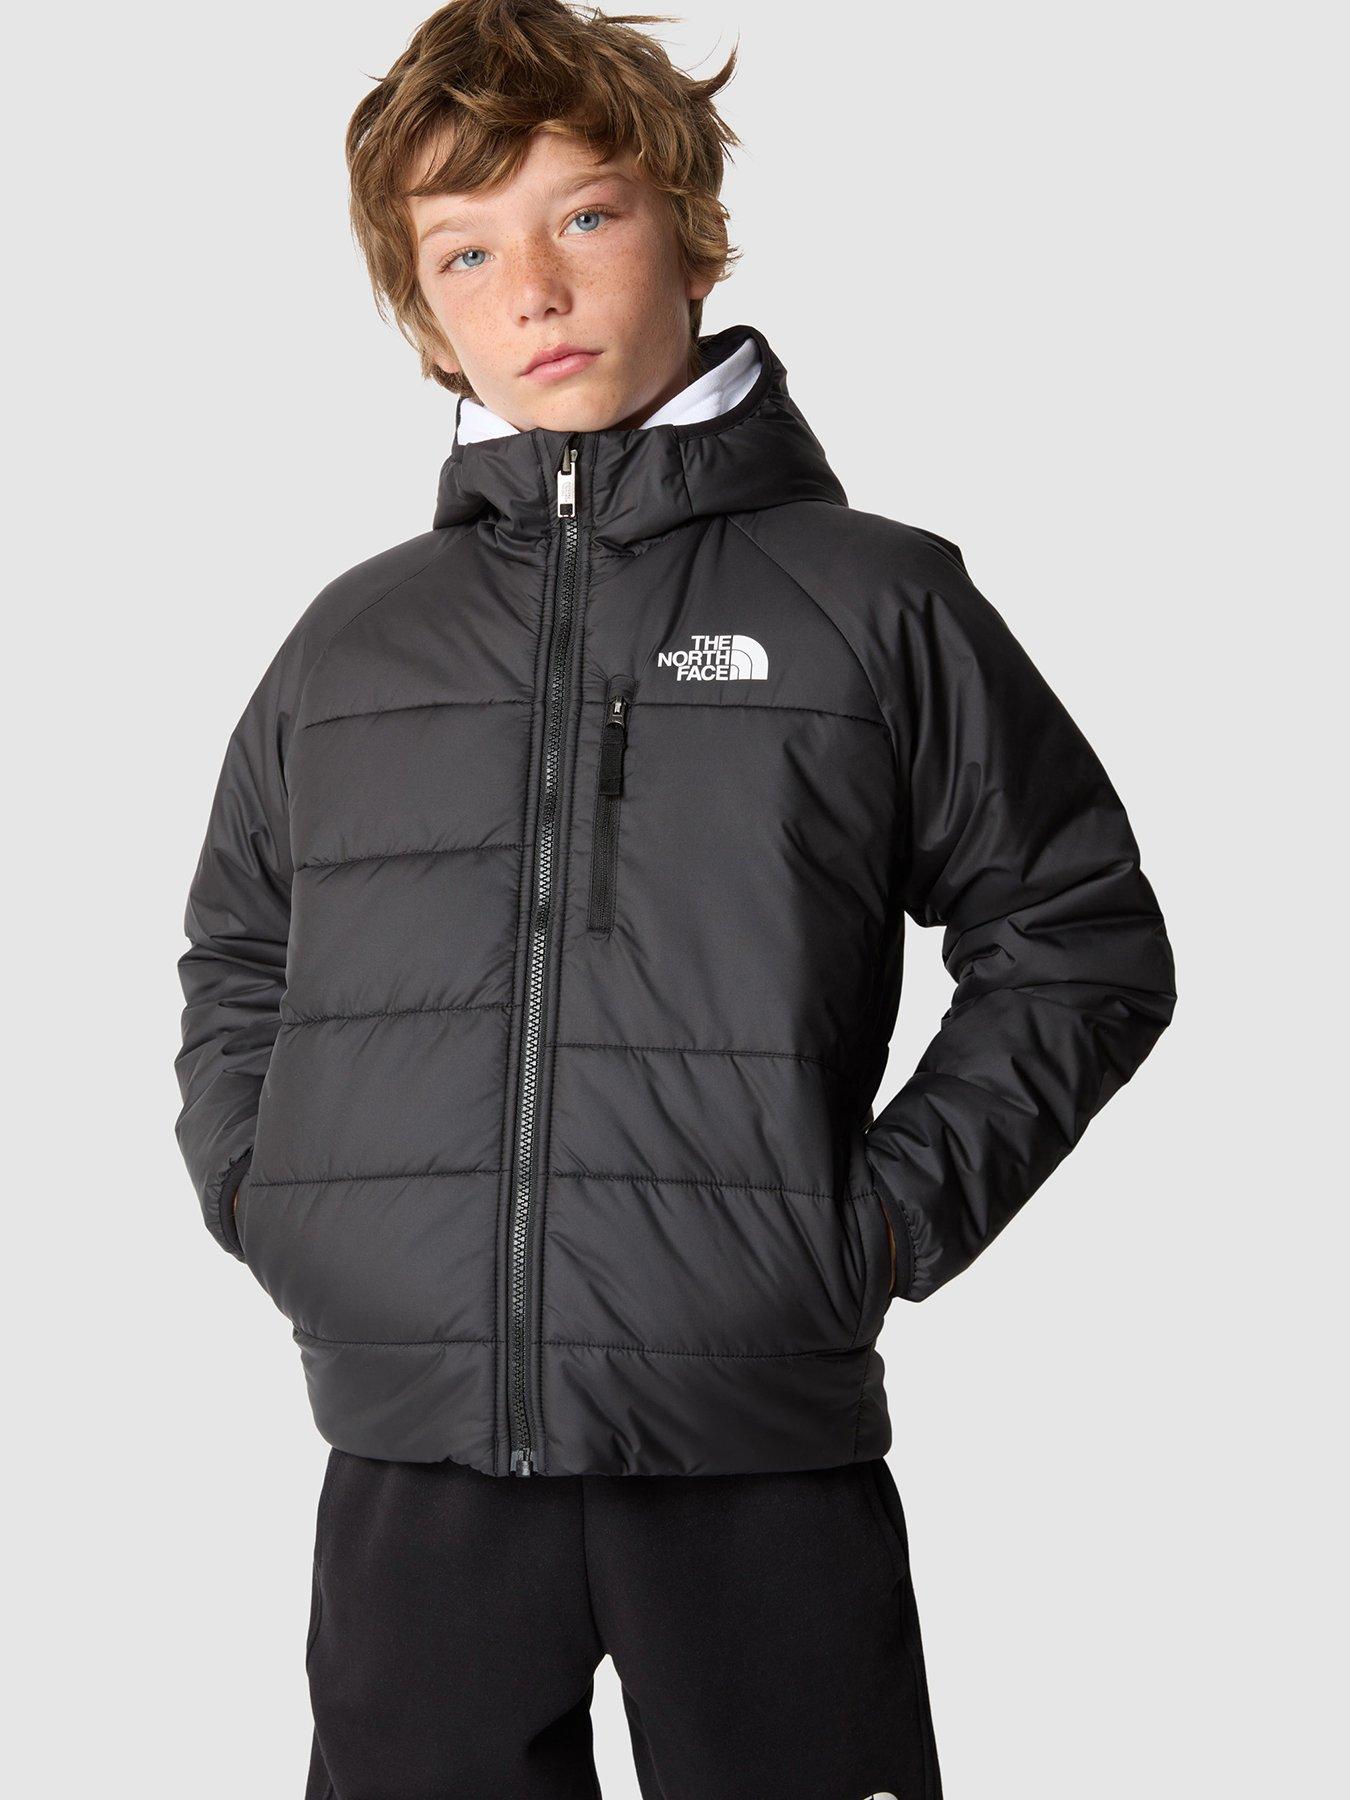 THE NORTH FACE Older Boys Reversible Perrito Jacket - Black | very.co.uk